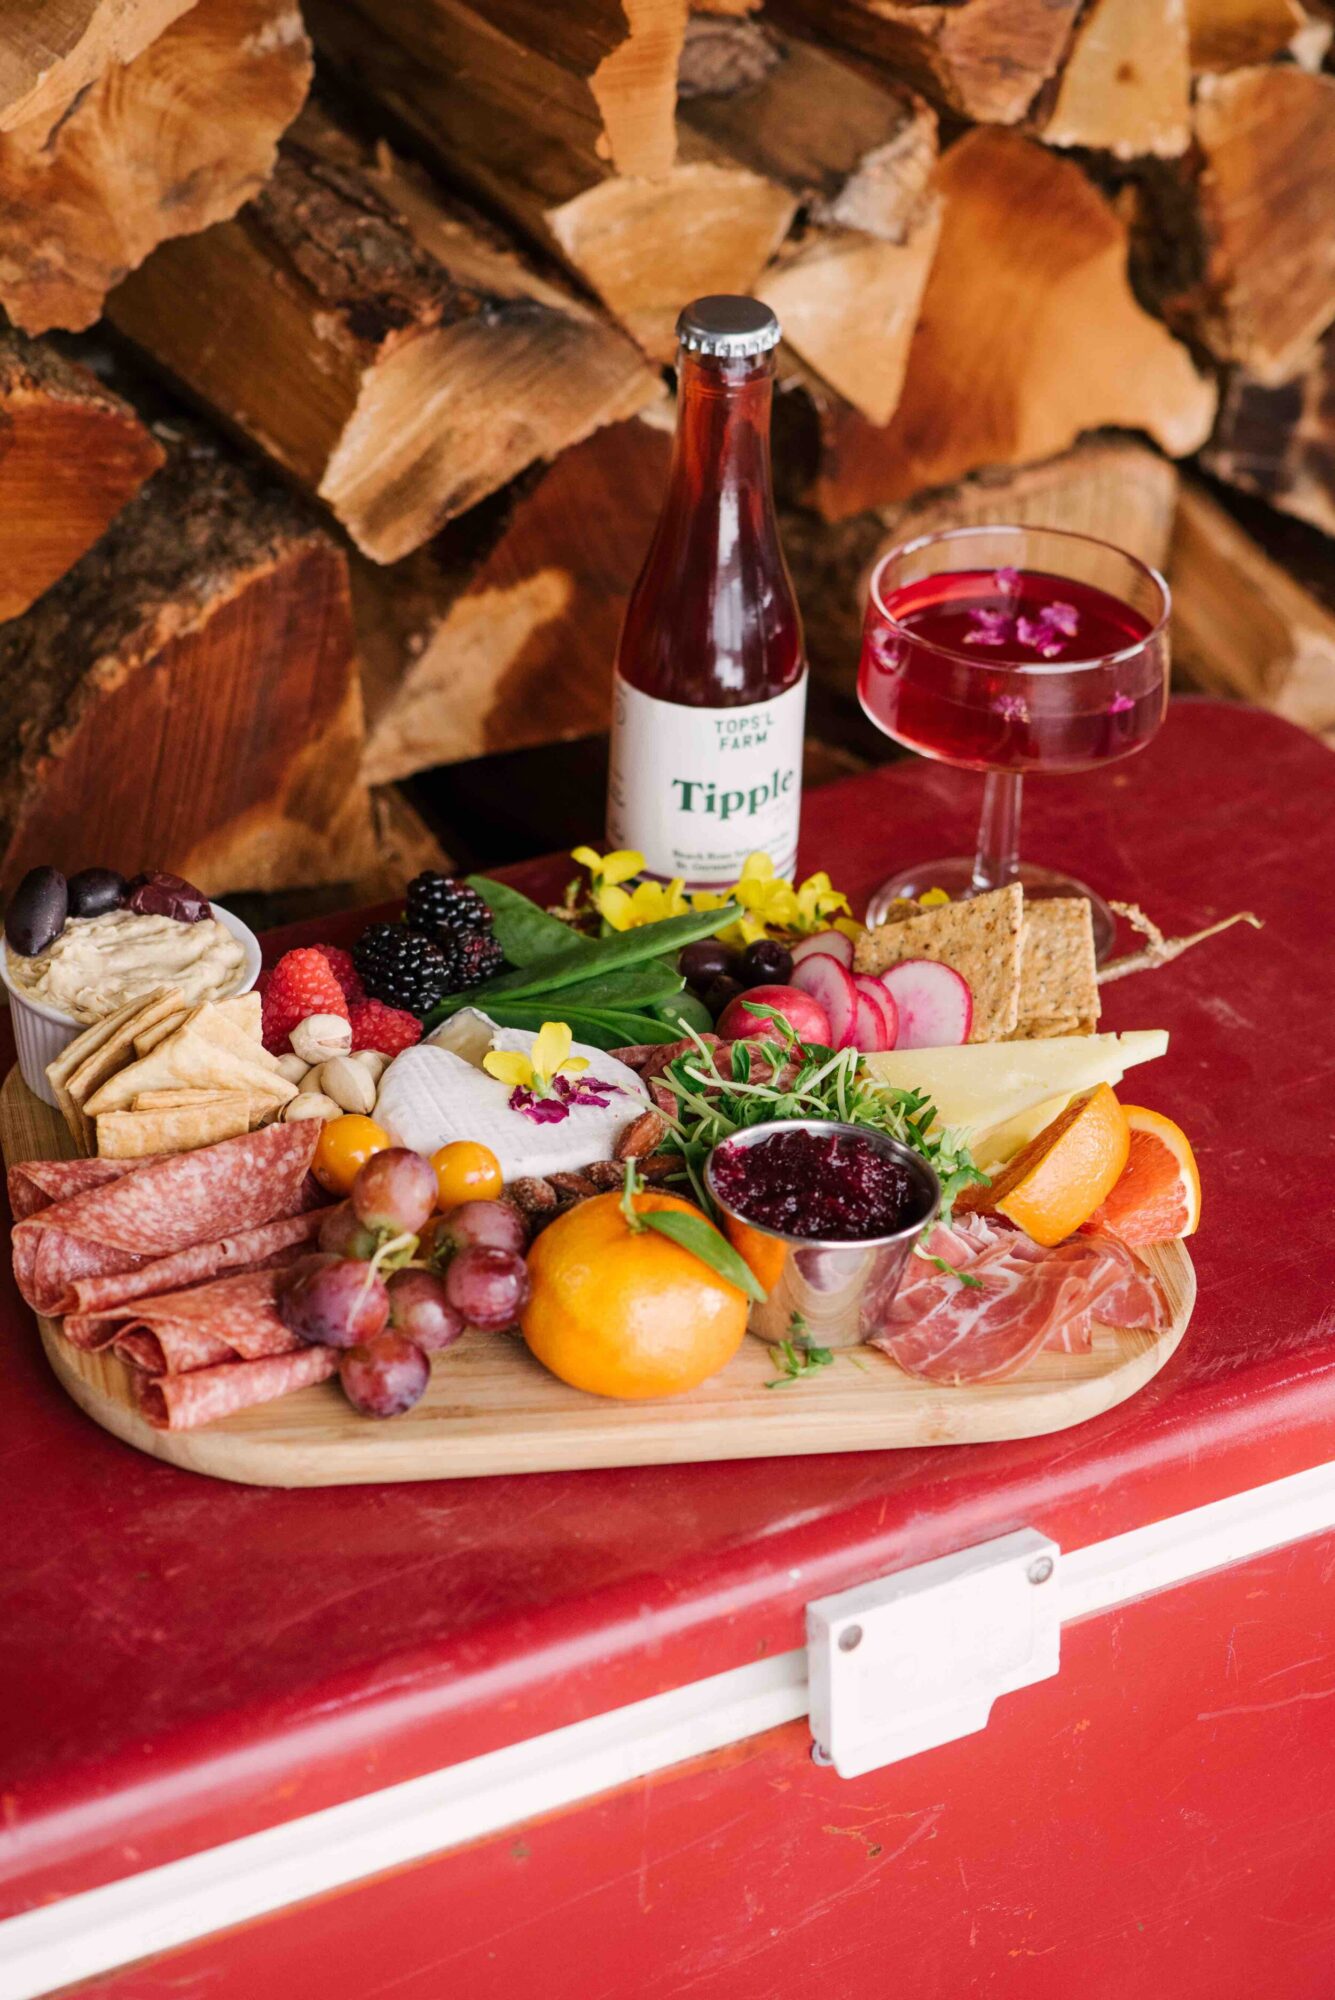 Local cheese, cured meats, and fermented vegetables are paired with artisanal crackers, seasonal fruits, and floral garnishes to create an opulent picnic cheese board.